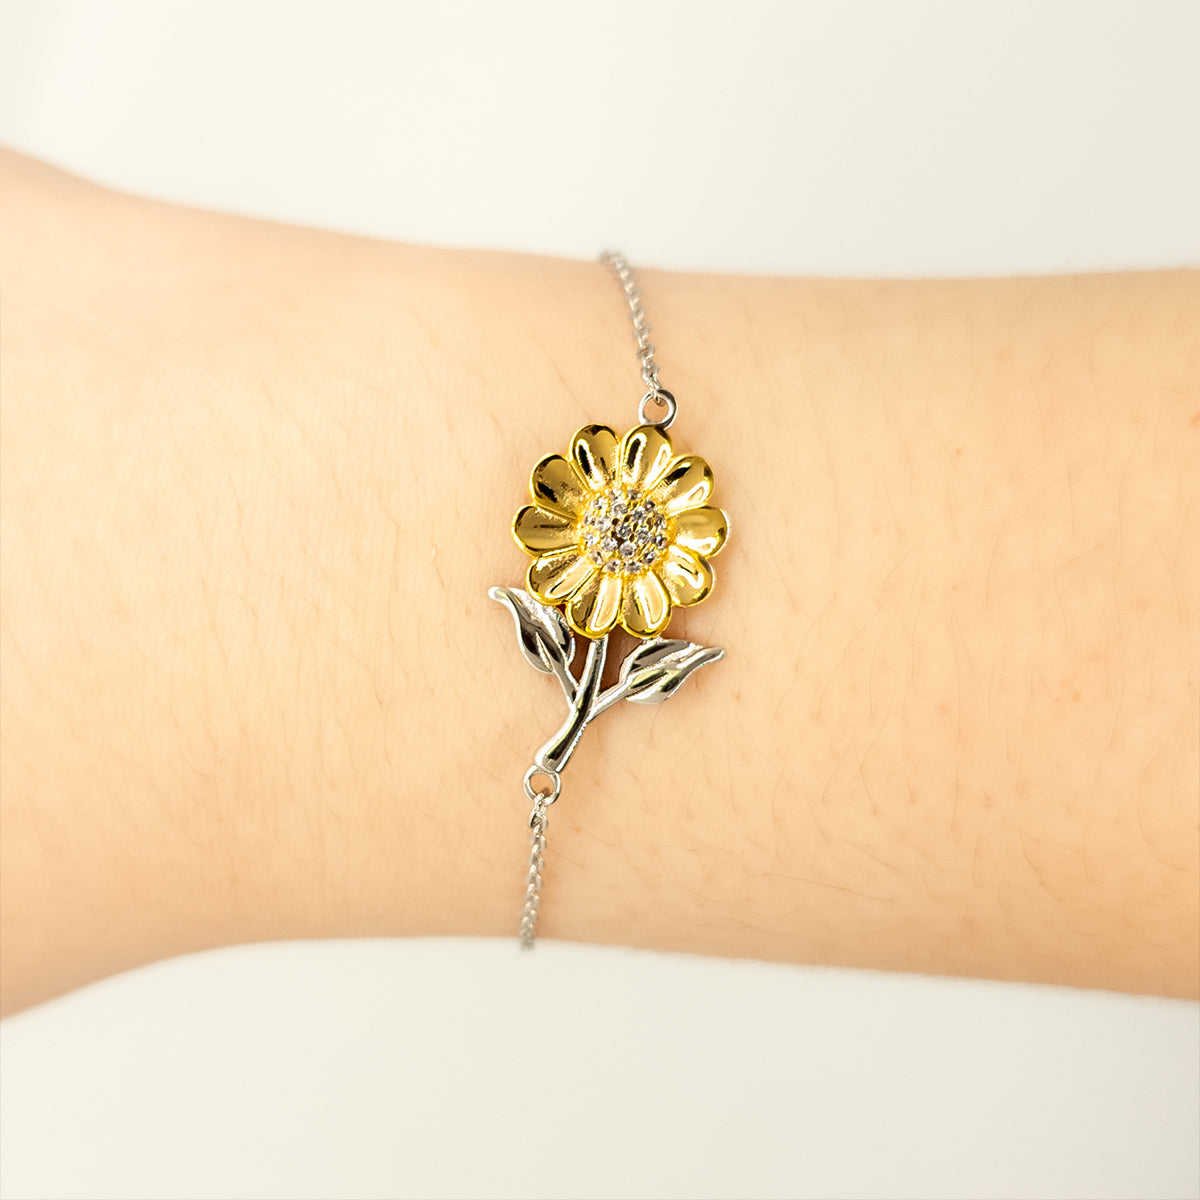 Funny Security Guard Mom Gifts, The best kind of MOM raises Security Guard, Birthday, Mother's Day, Cute Sunflower Bracelet for Security Guard Mom